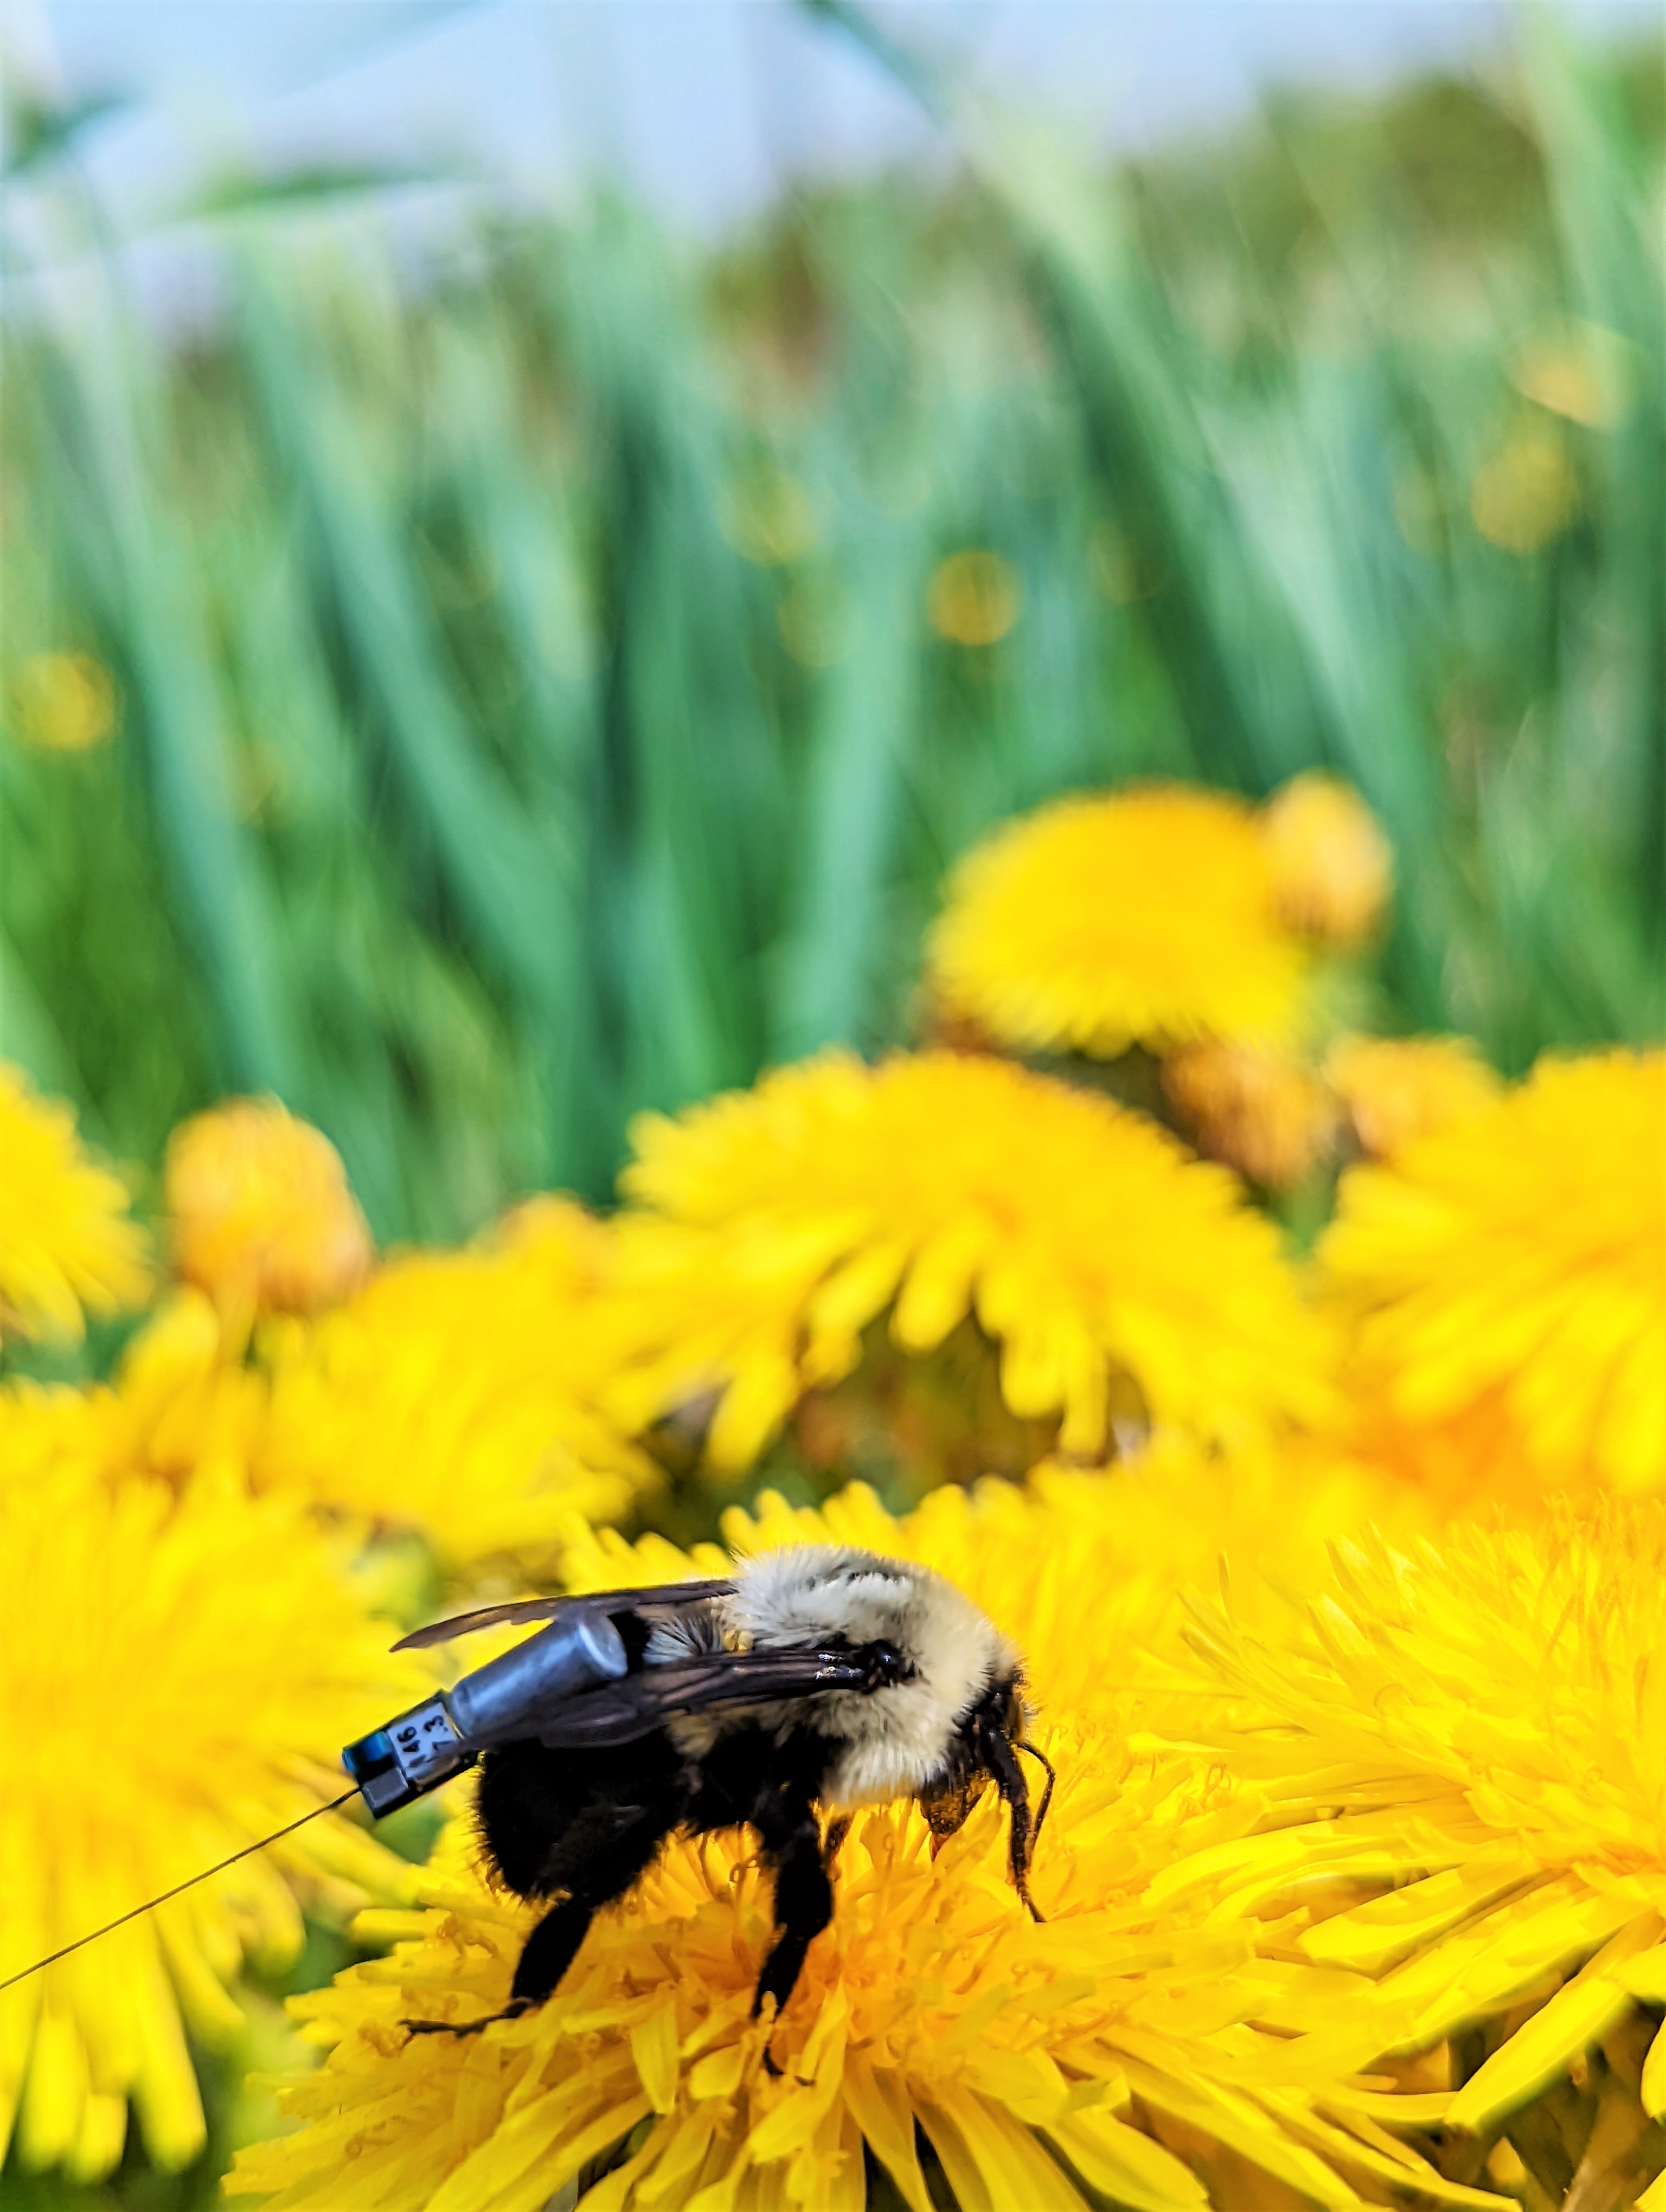 A bumble bee on a yellow flower with other flows around it